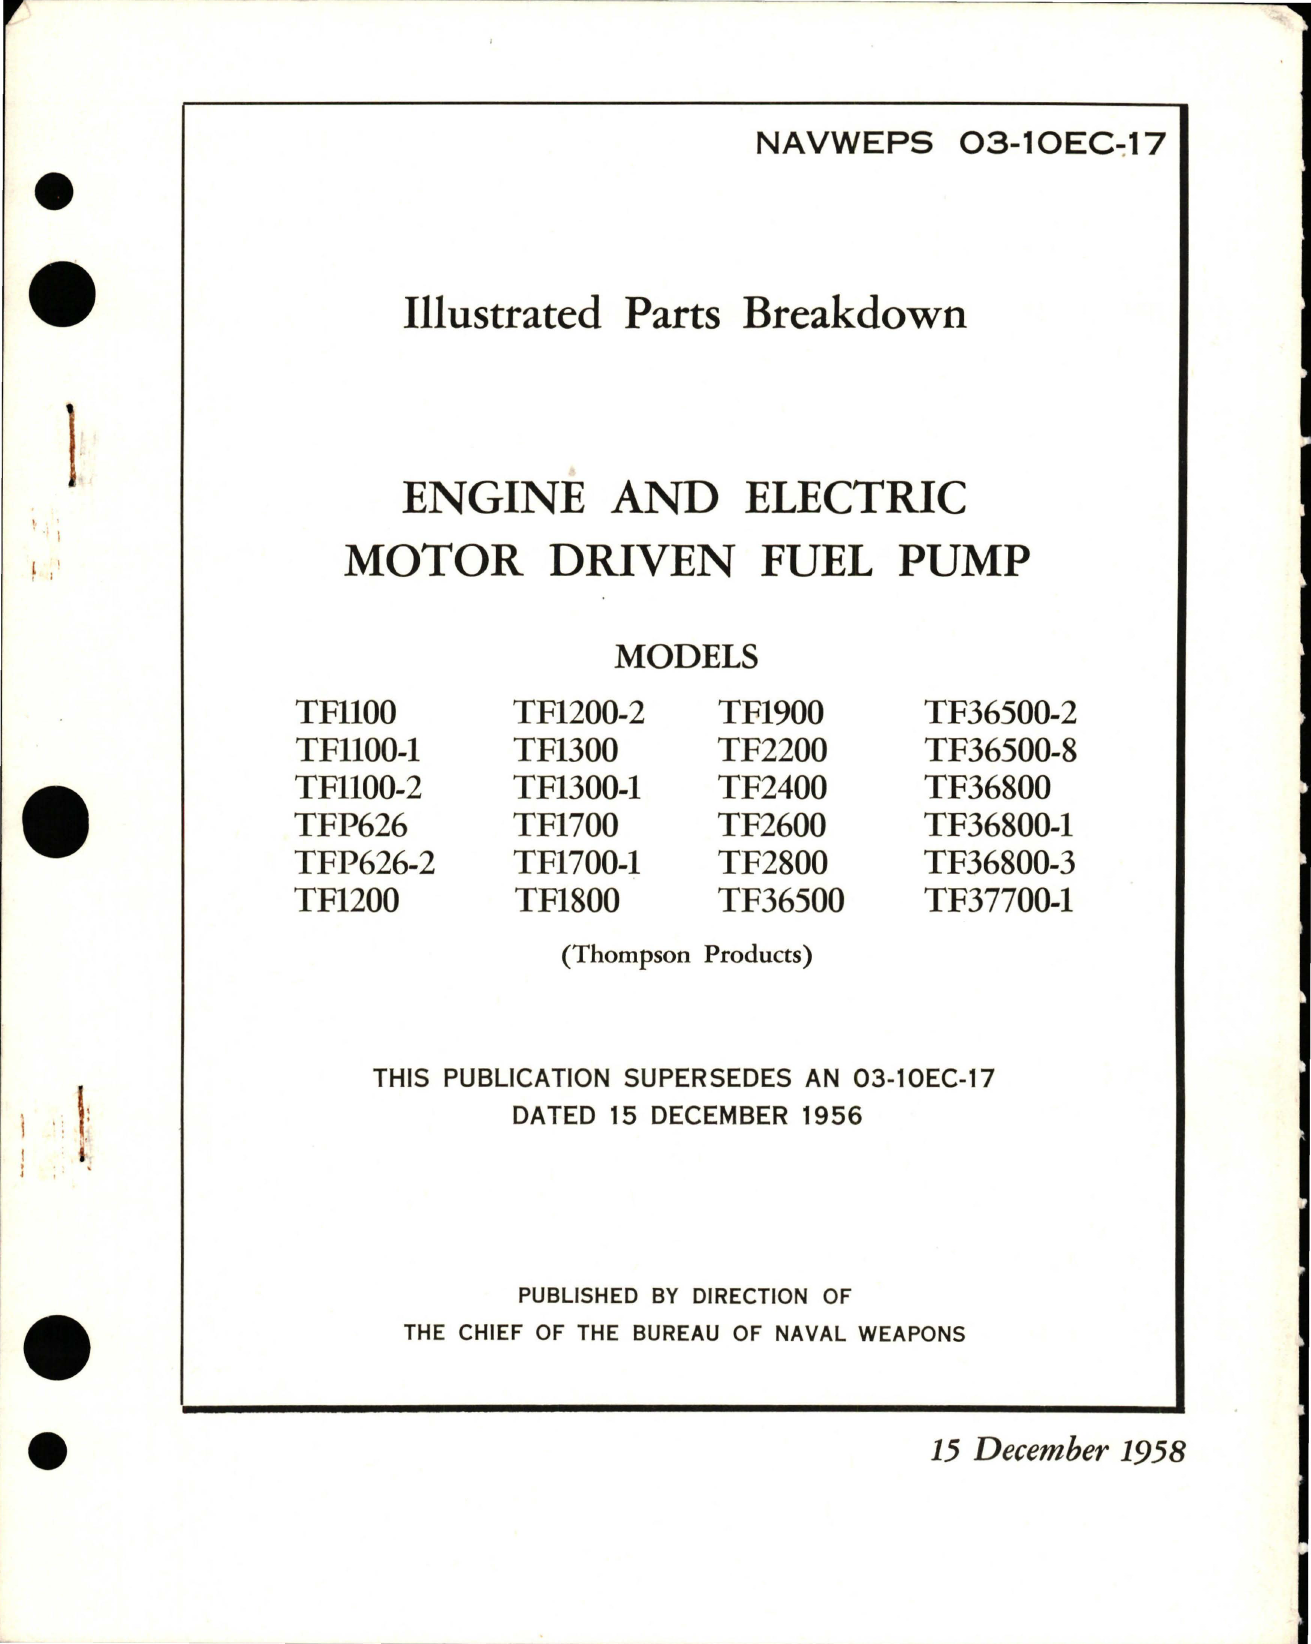 Sample page 1 from AirCorps Library document: Illustrated Parts Breakdown for Engine and Electric Motor Driven Fuel Pump